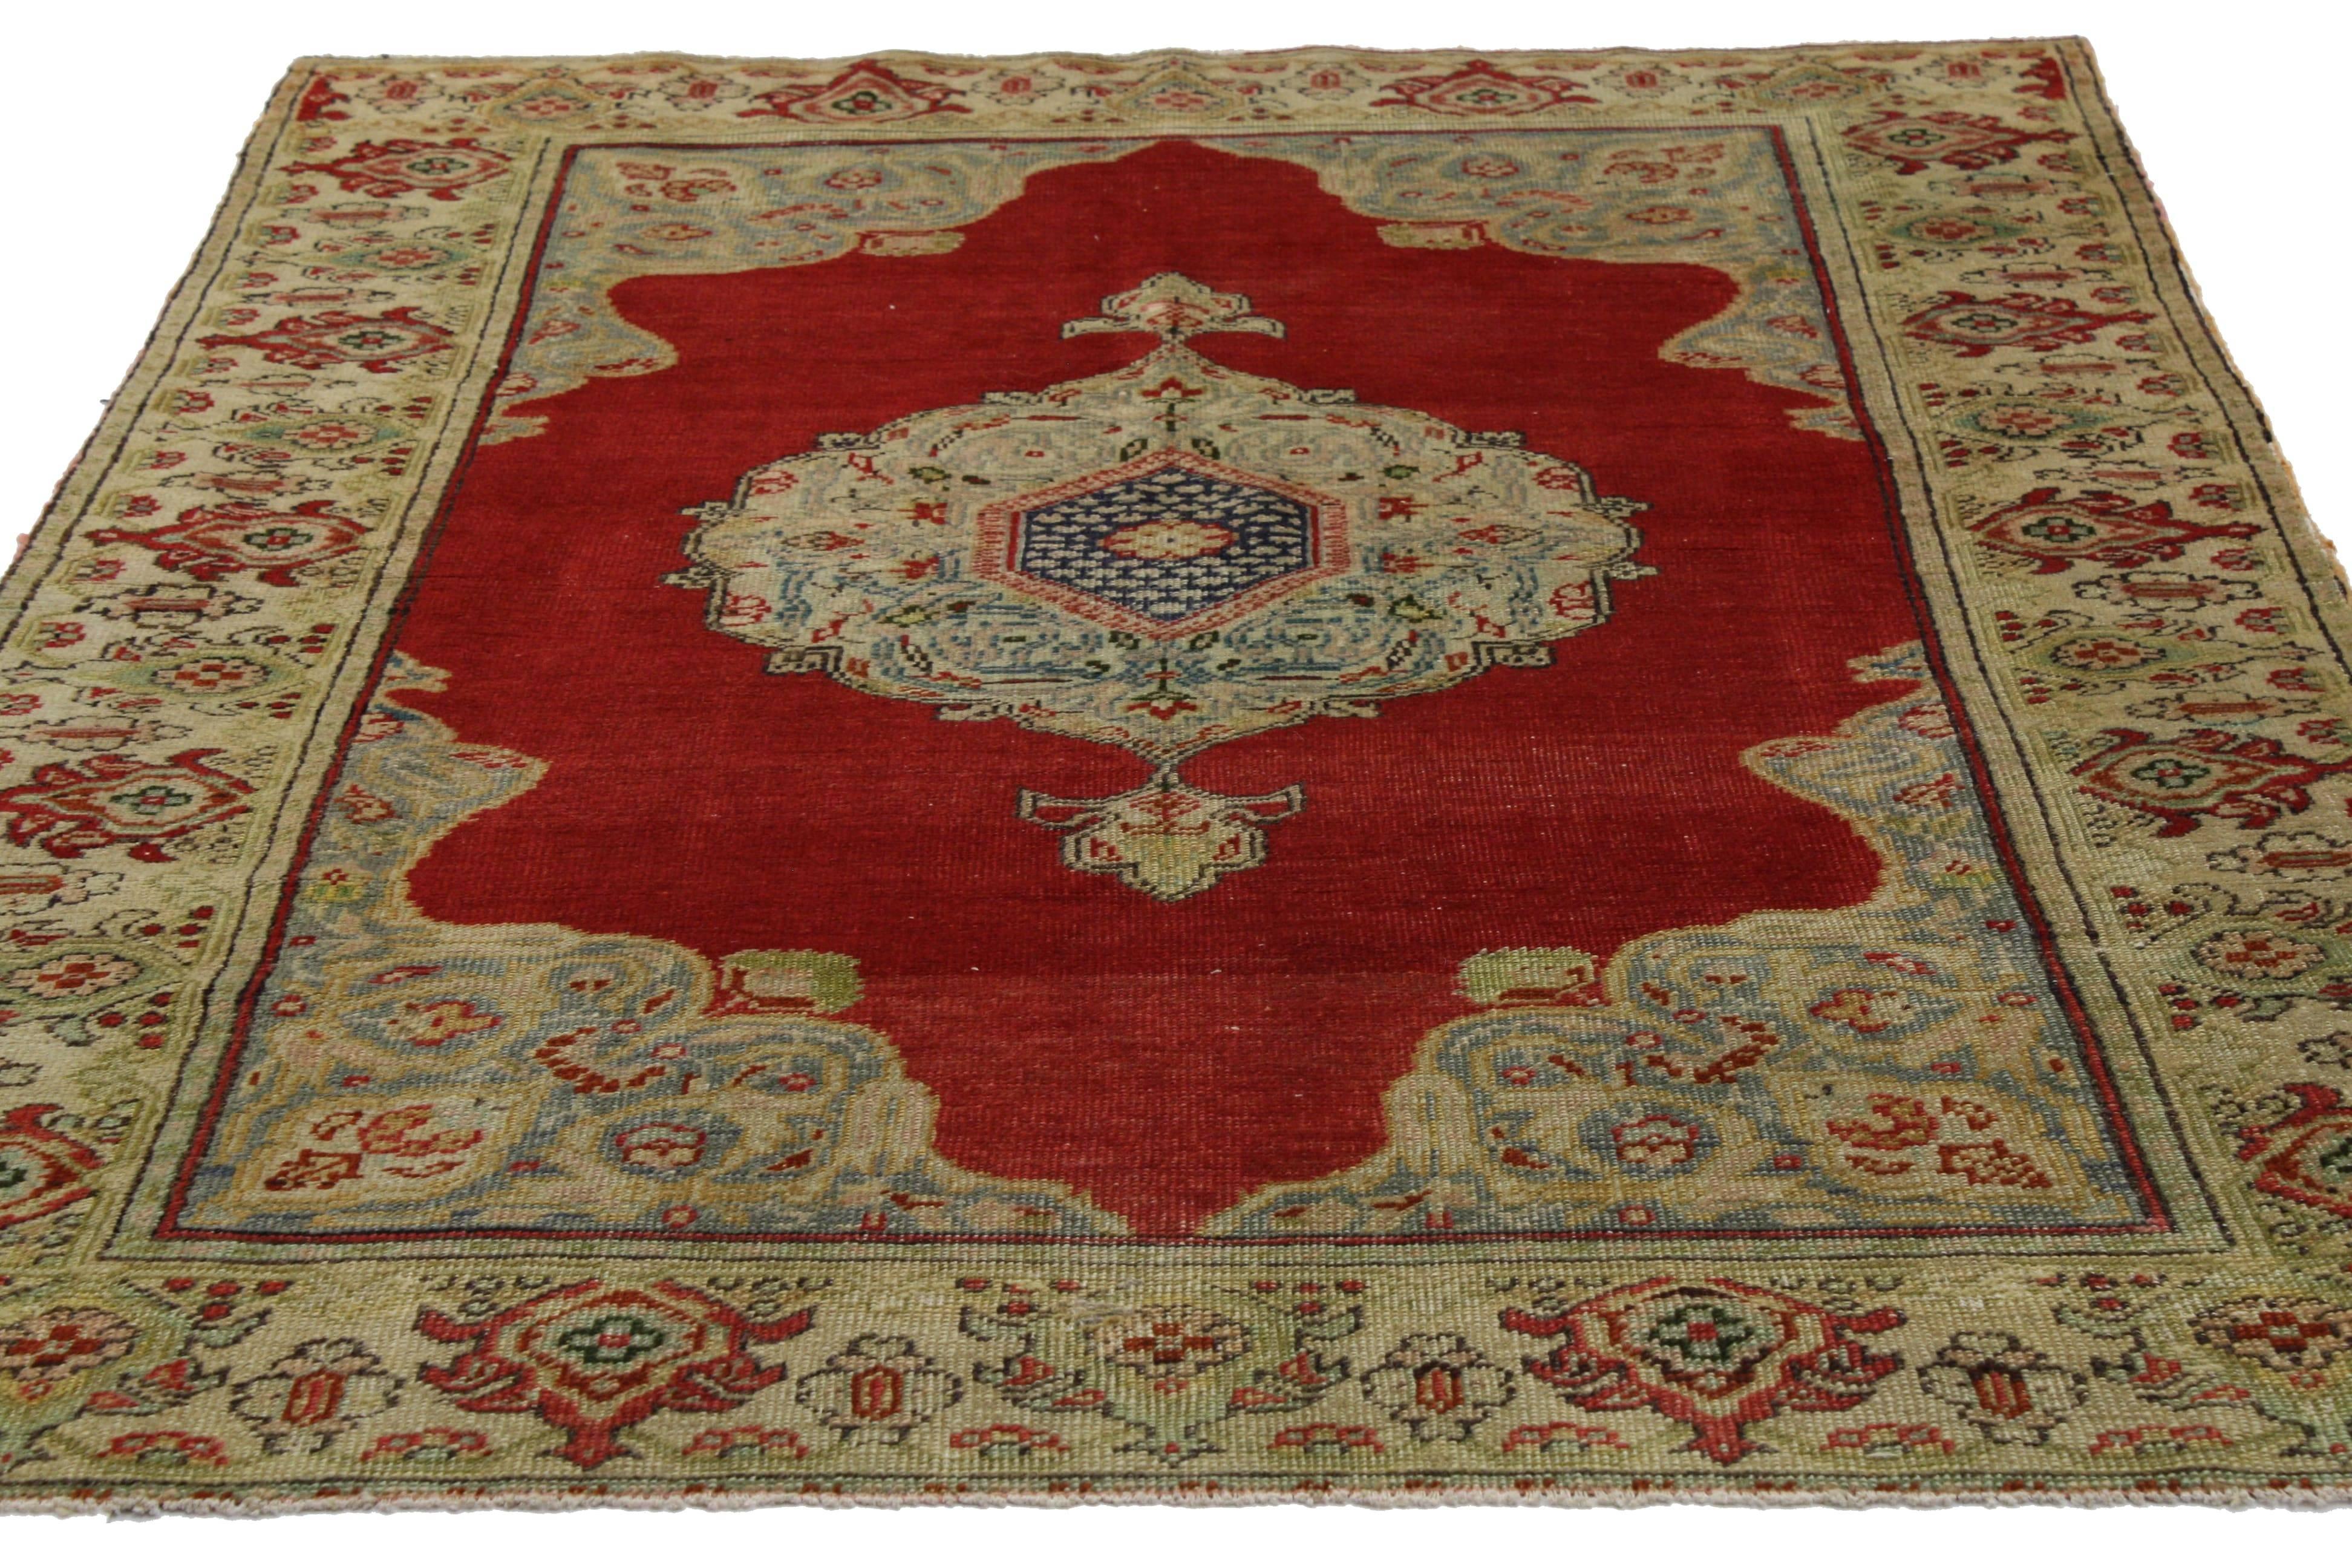 51557, vintage Turkish Oushak Accent rug, entry or foyer rug. This vintage Turkish Oushak rug features a modern traditional style. Immersed in Anatolian history and refined colors, this vintage Oushak rug combines simplicity with sophistication.